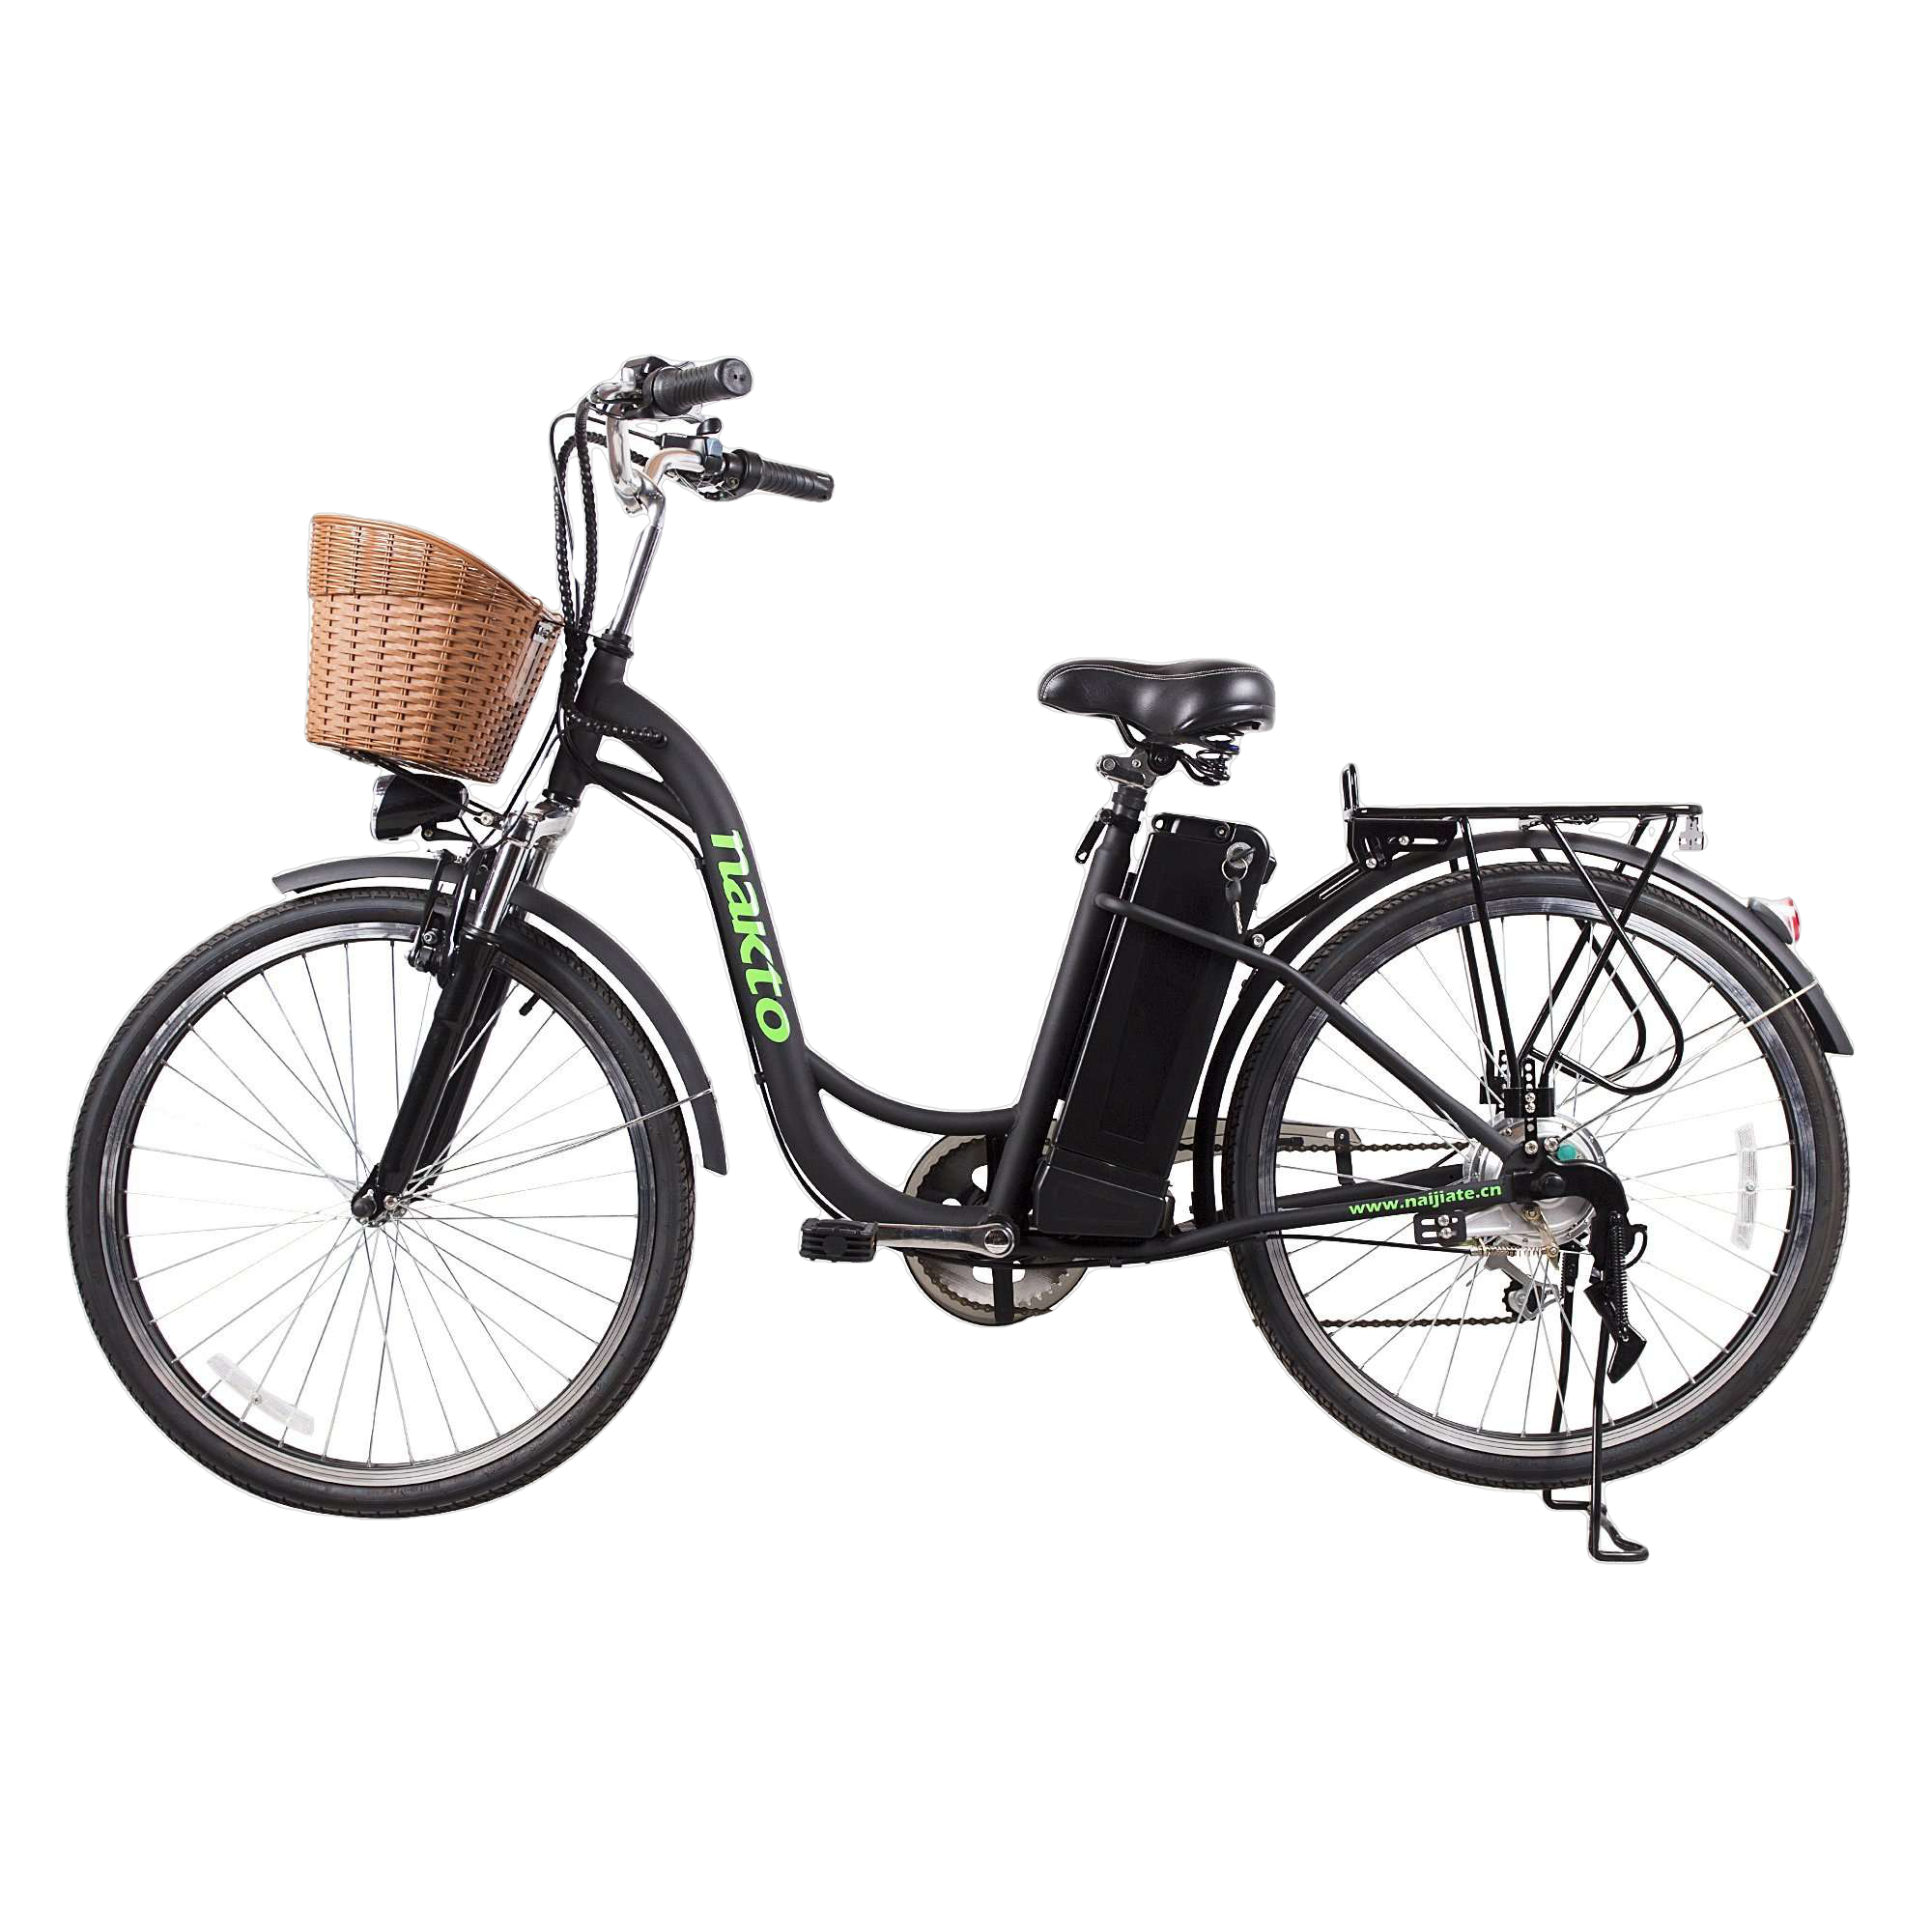 Nakto, NAKTO 26 inch 250W Motor with Peak 350W 19 MPH Camel Electric Bicycle 6 Speed E-Bike 36V Lithium Battery Female/Young Adult Black New